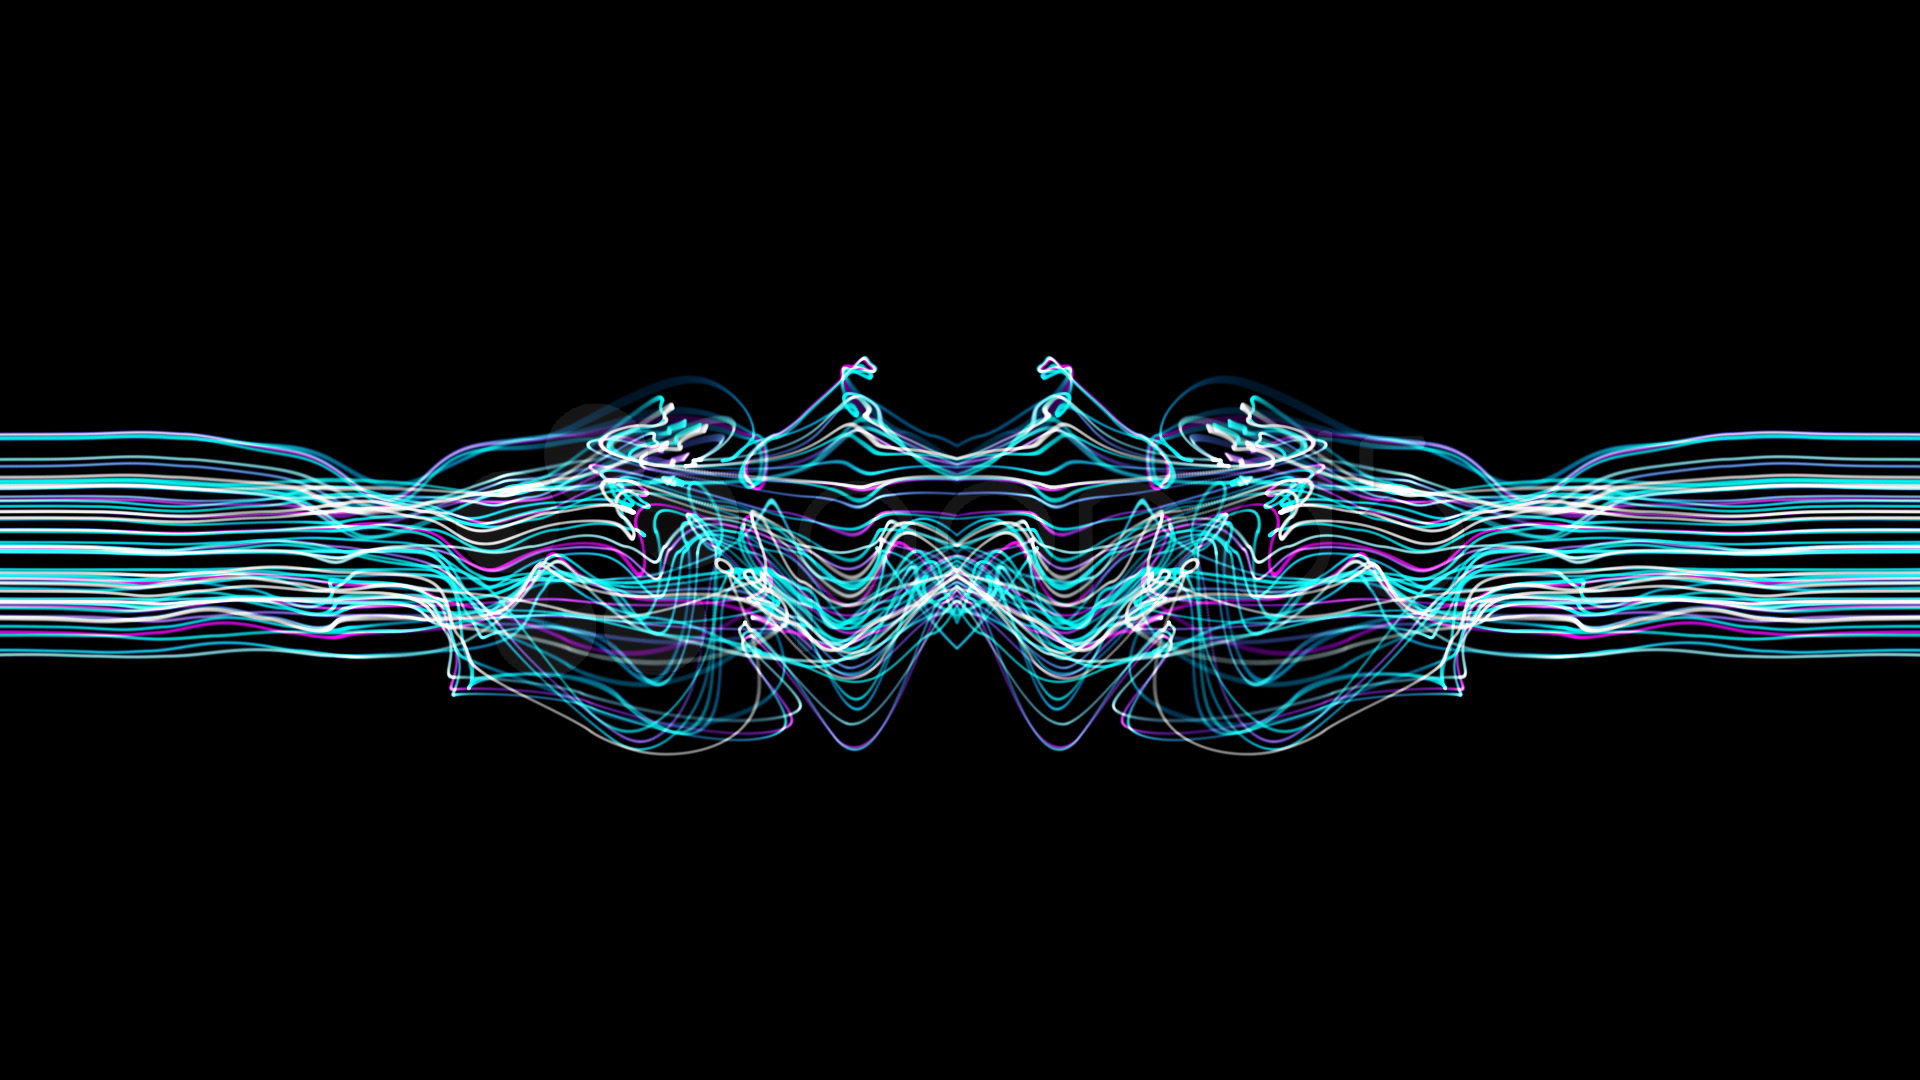 Displaying 15 Images For   Moving Sound Waves Wallpaper 1920x1080